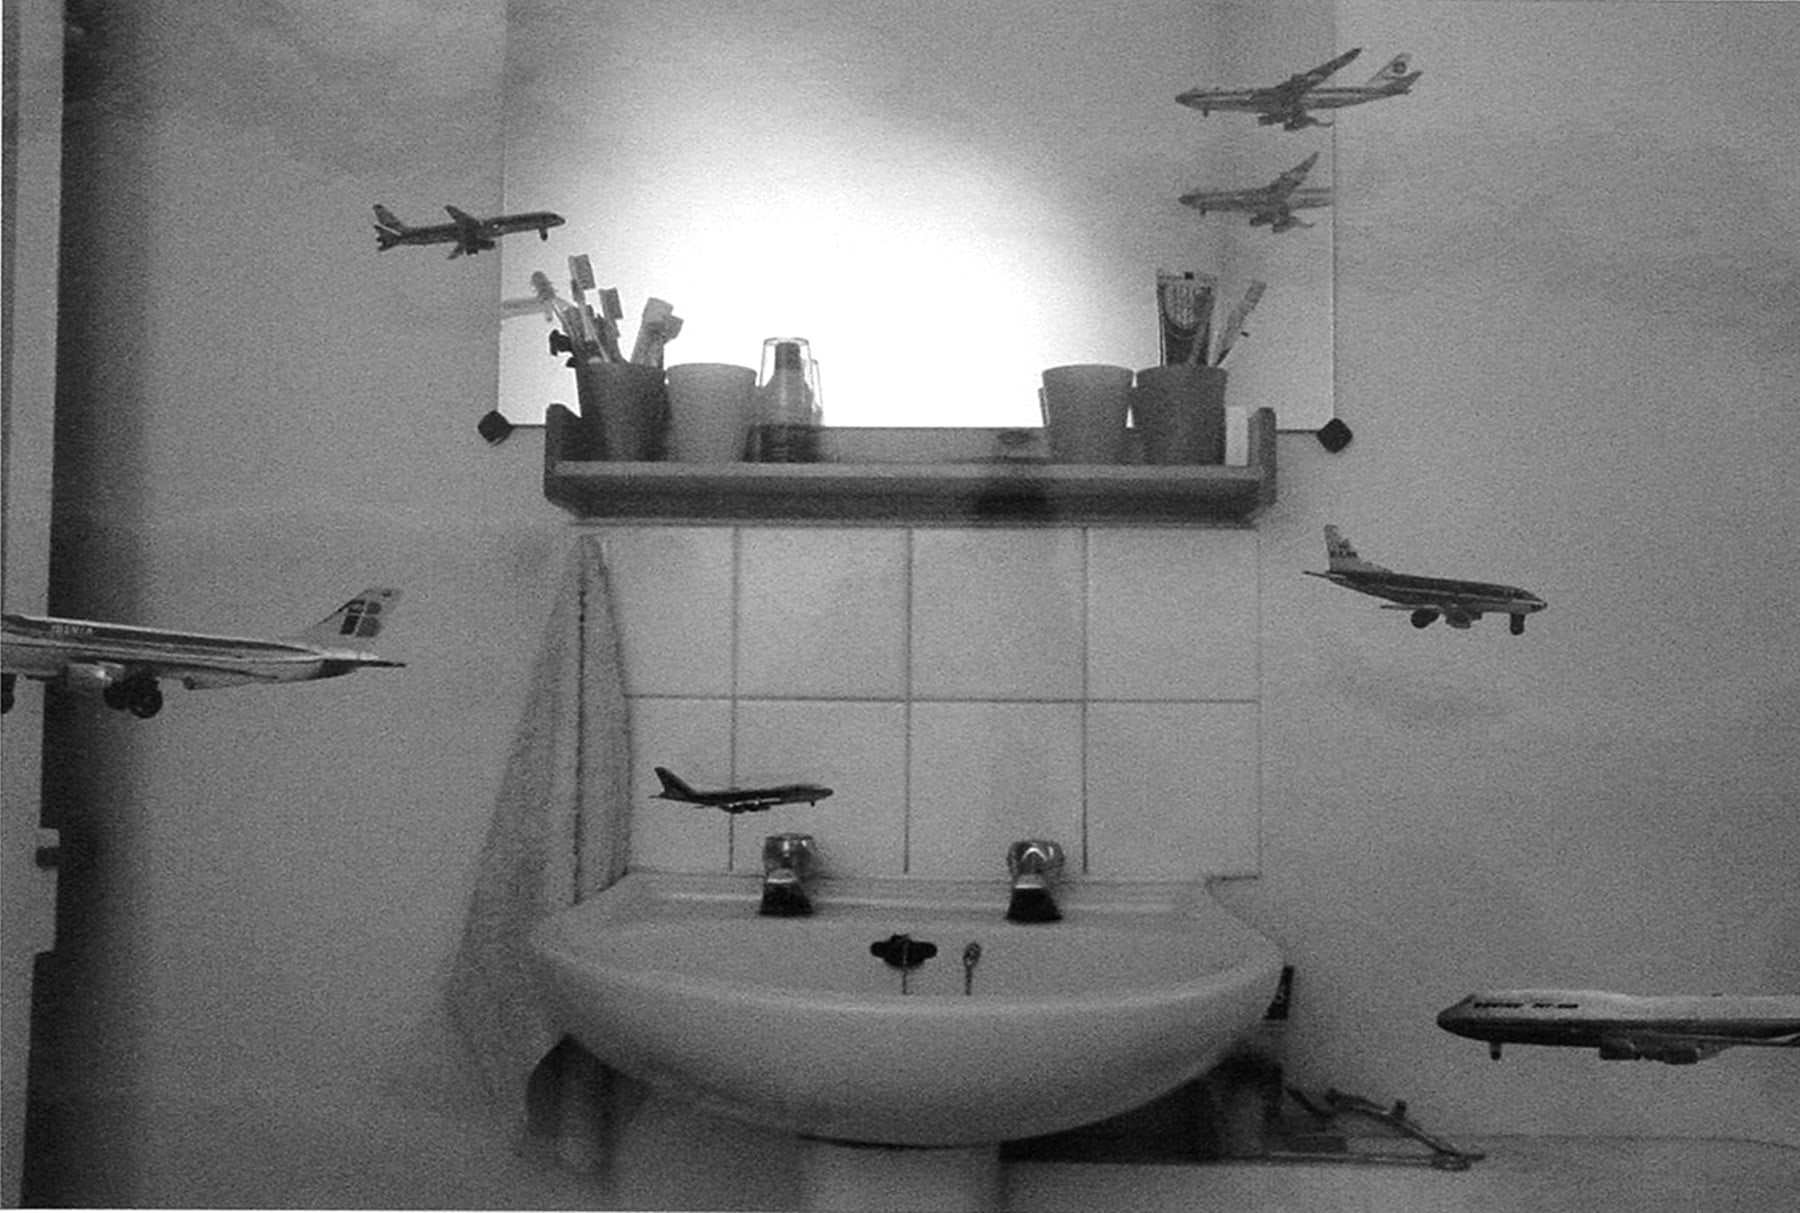 miniature airplanes flying around a bathroom